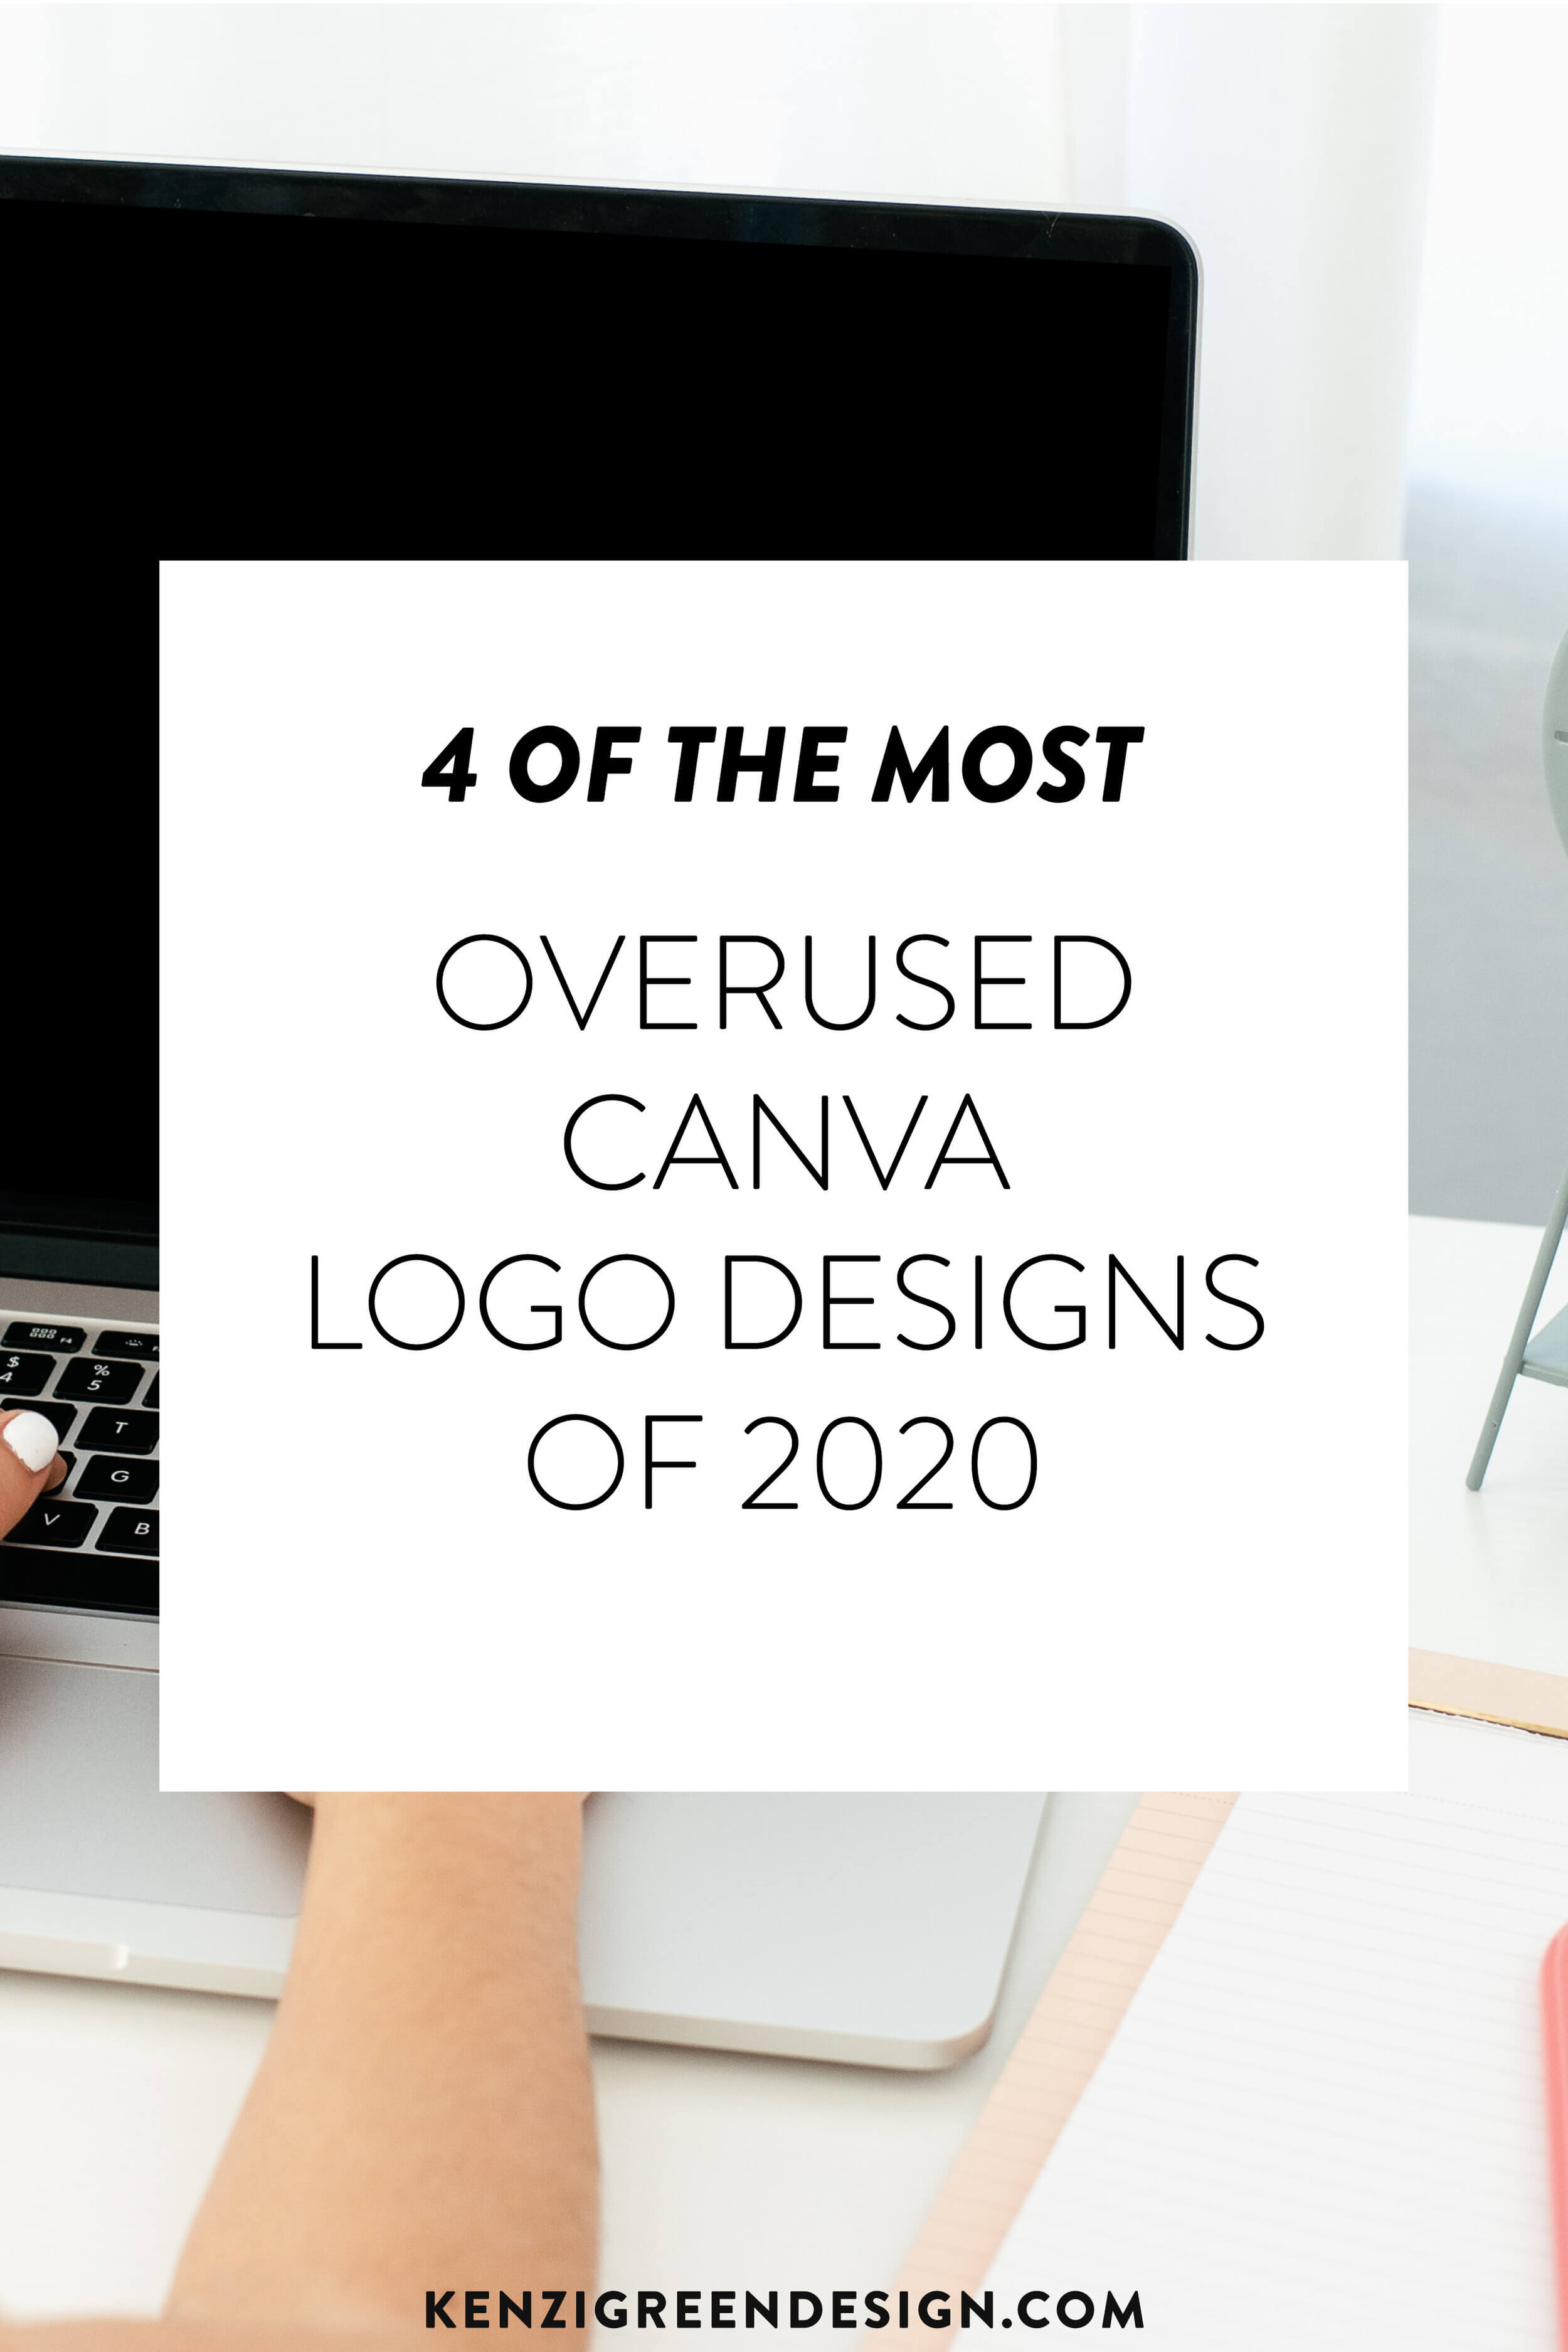 4 Of The Most OVERUSED CANVA Logo Designs Of 2020 #canvalogo #canvalogodesign #canvatips #canvadesign